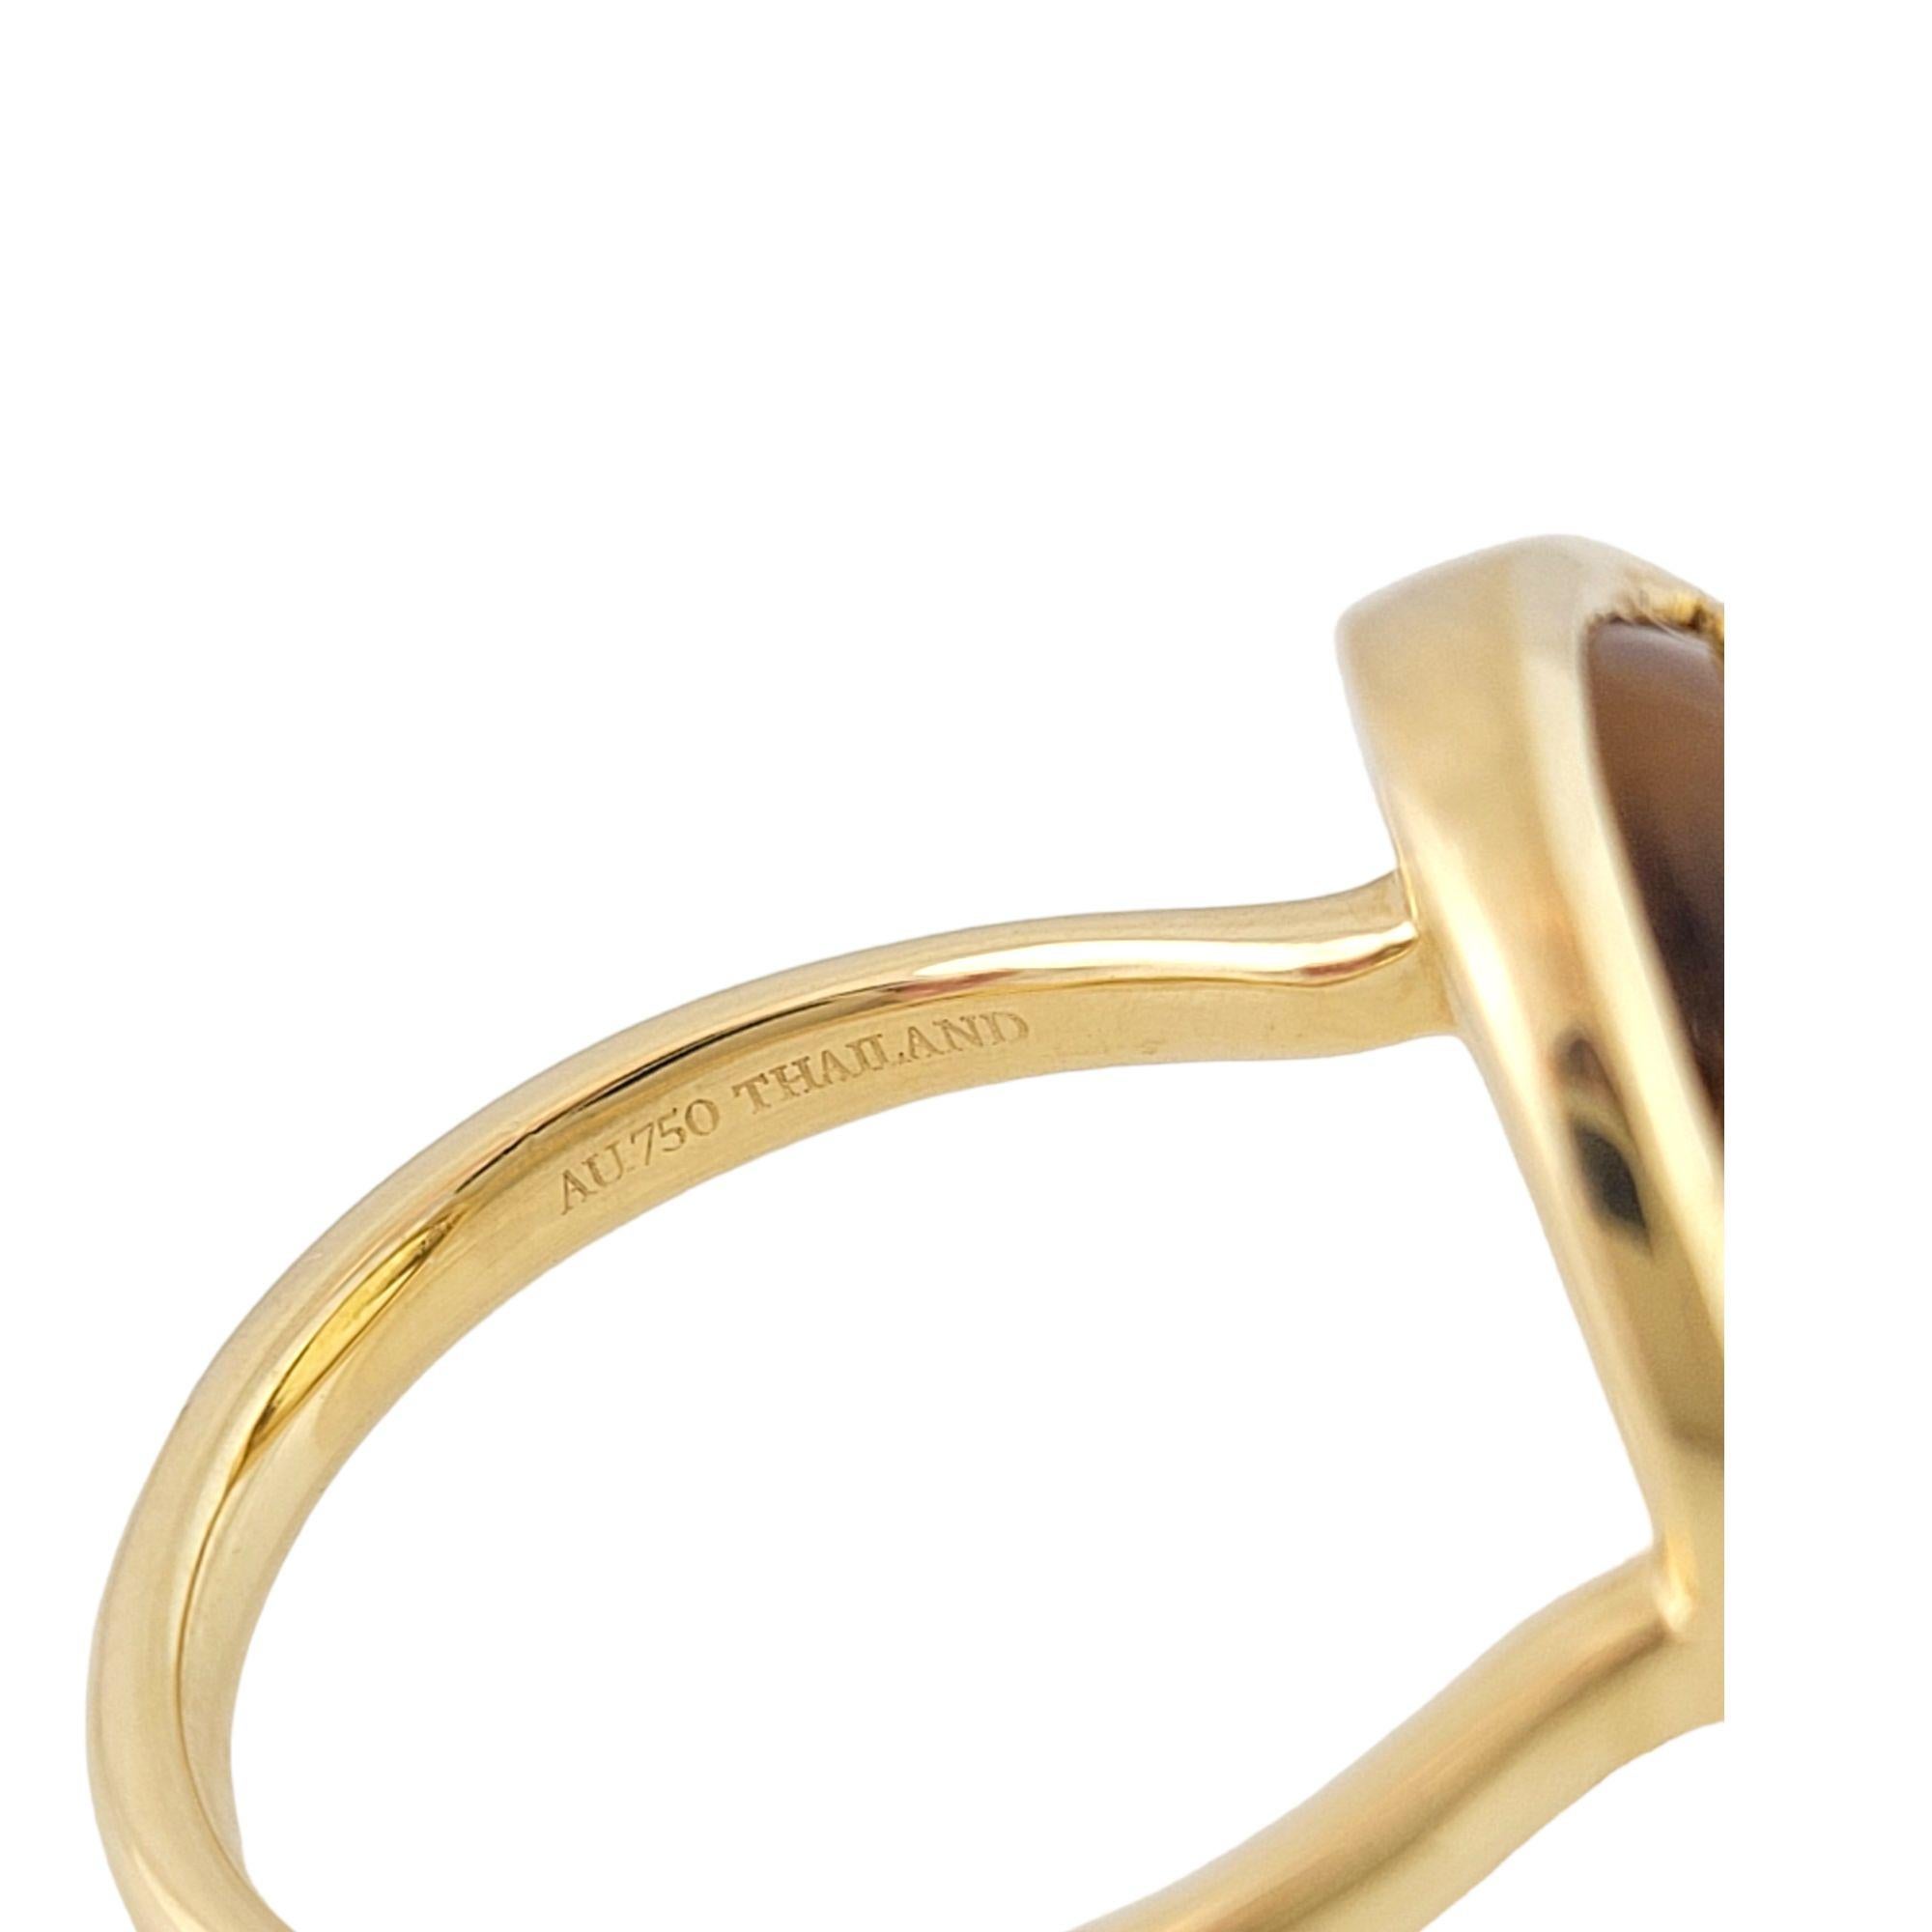 Vintage Tiffany & Co. Paloma Picasso 18 Karat Yellow Gold and Citrine Olive Leaf Ring Size 5-

This stunning 18K yellow gold ring by features one oval cabochon citrine* in a lovely olive leaf motif setting. By Paloma Picasso for Tiffany & Co. Width: